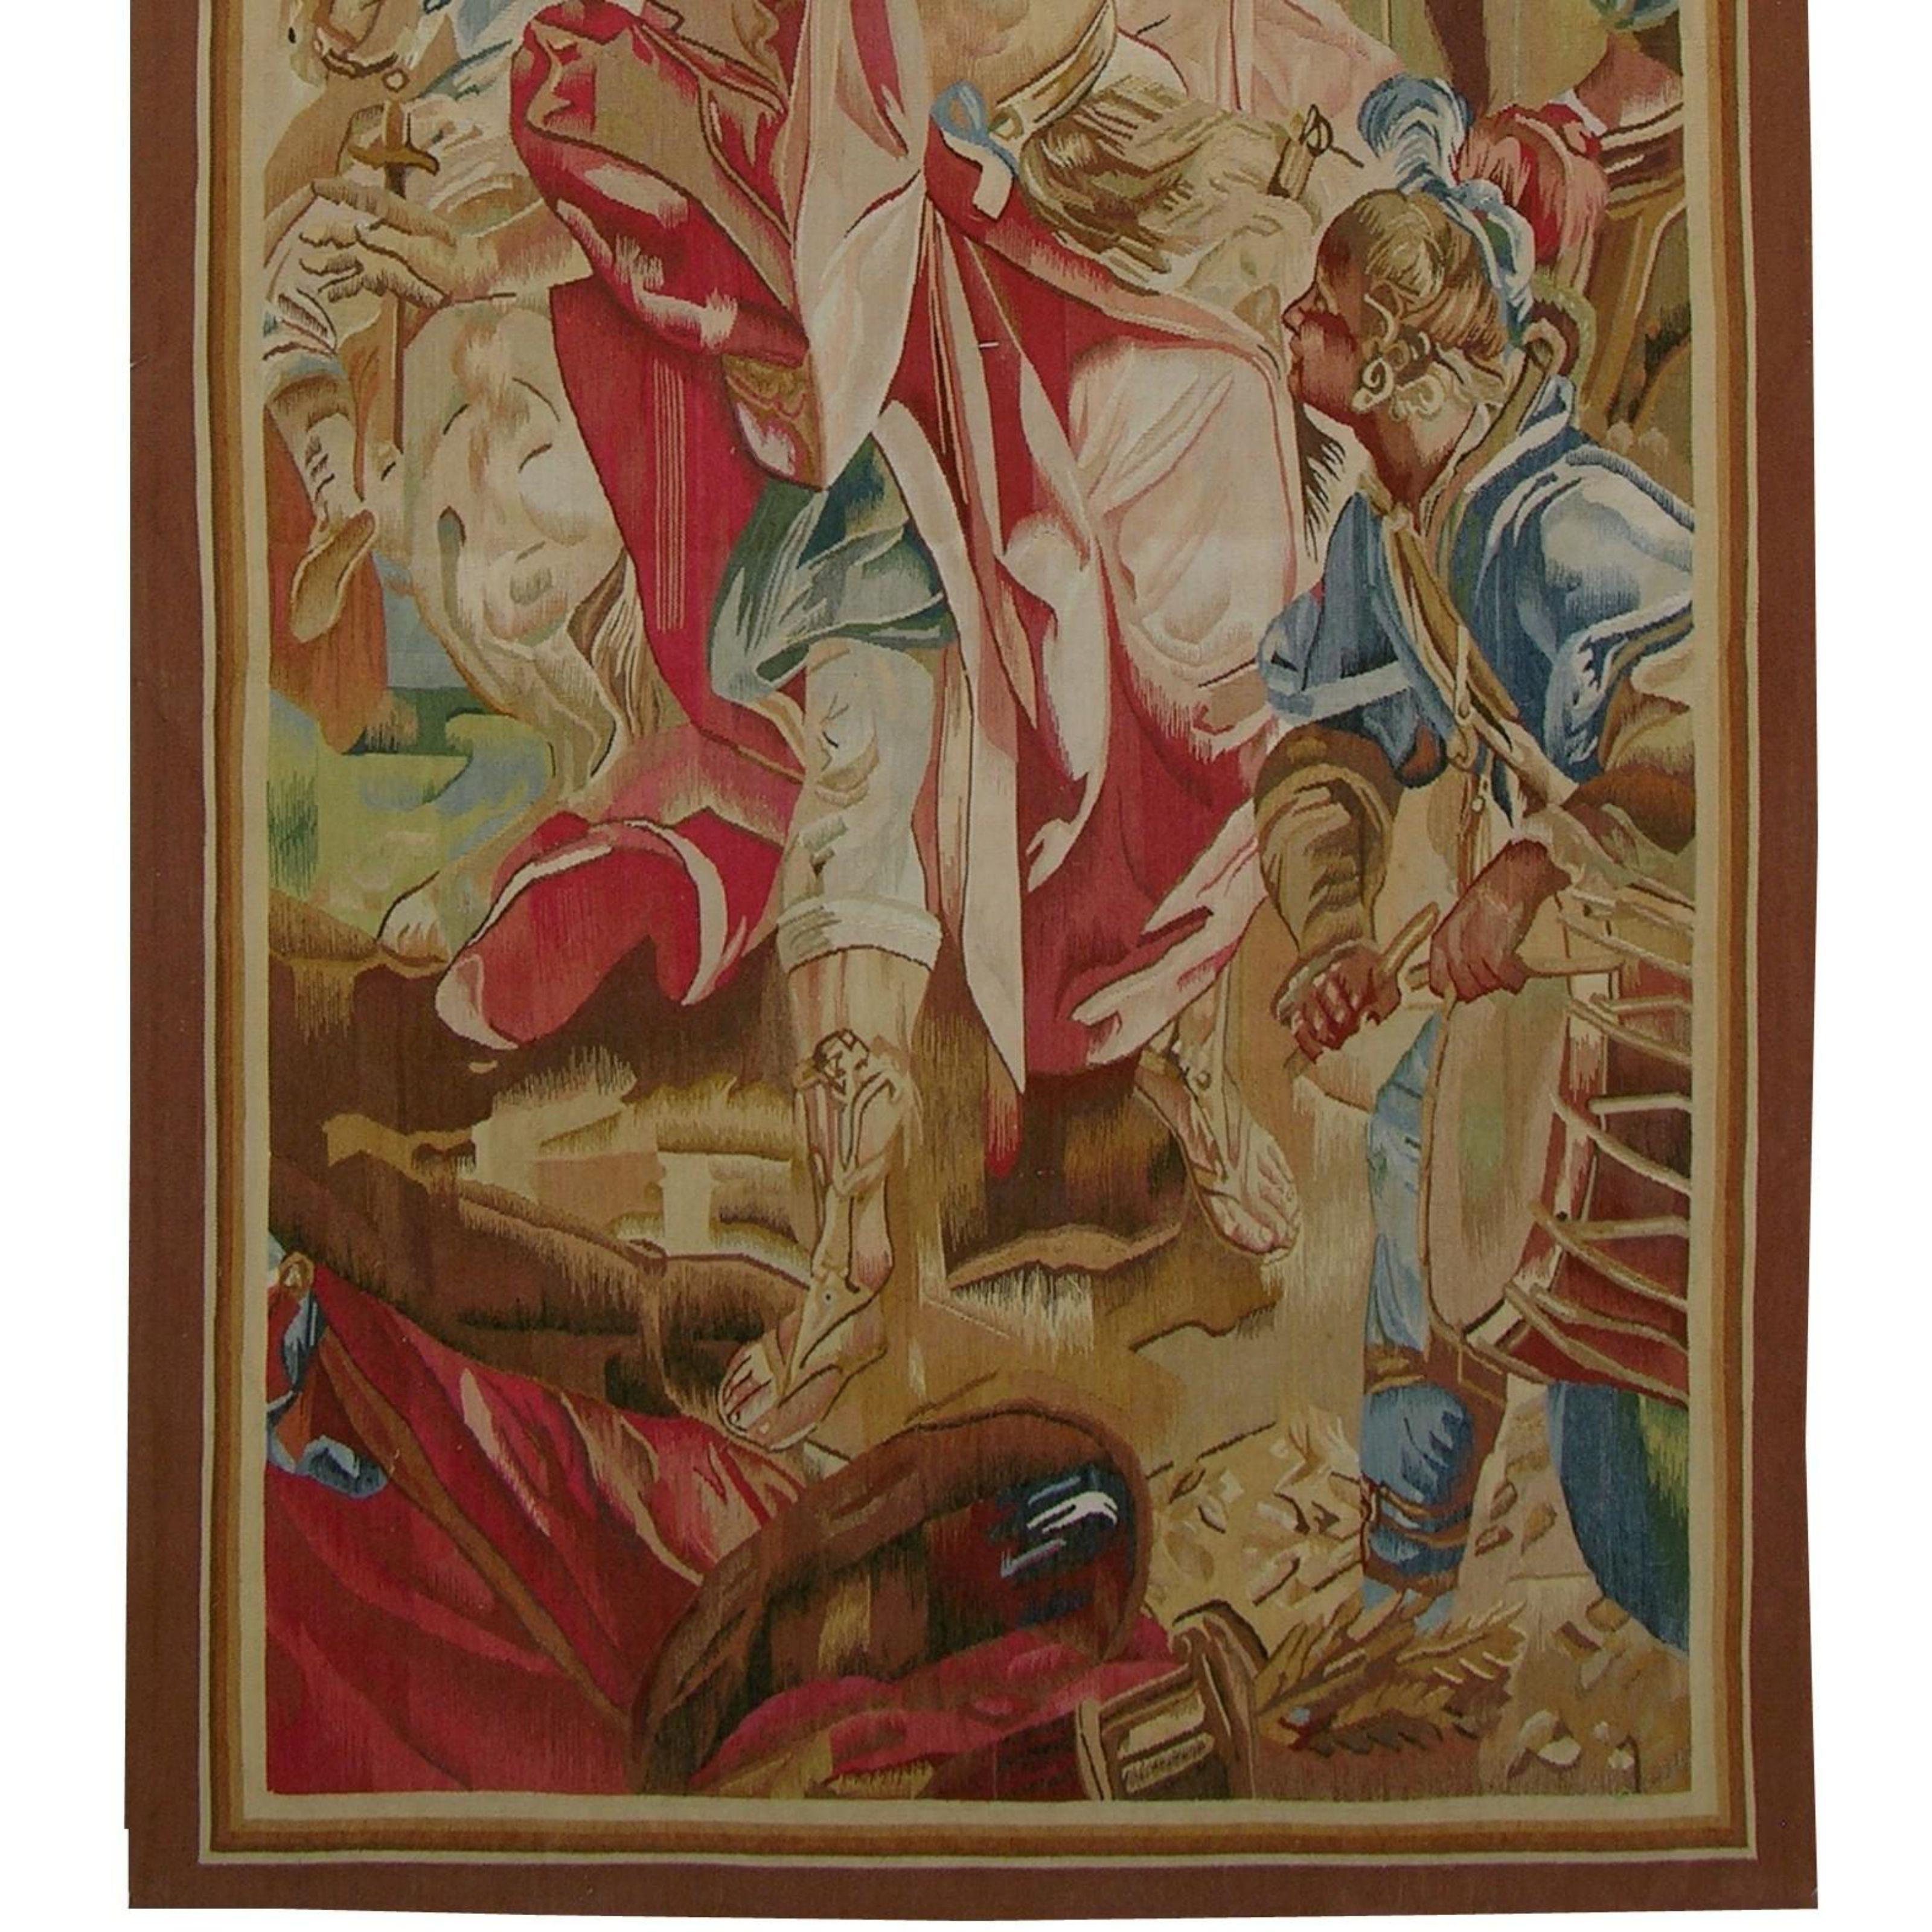 Unknown Vintage Tapestry Depicting a Gladiator in Action 8' X 3'6